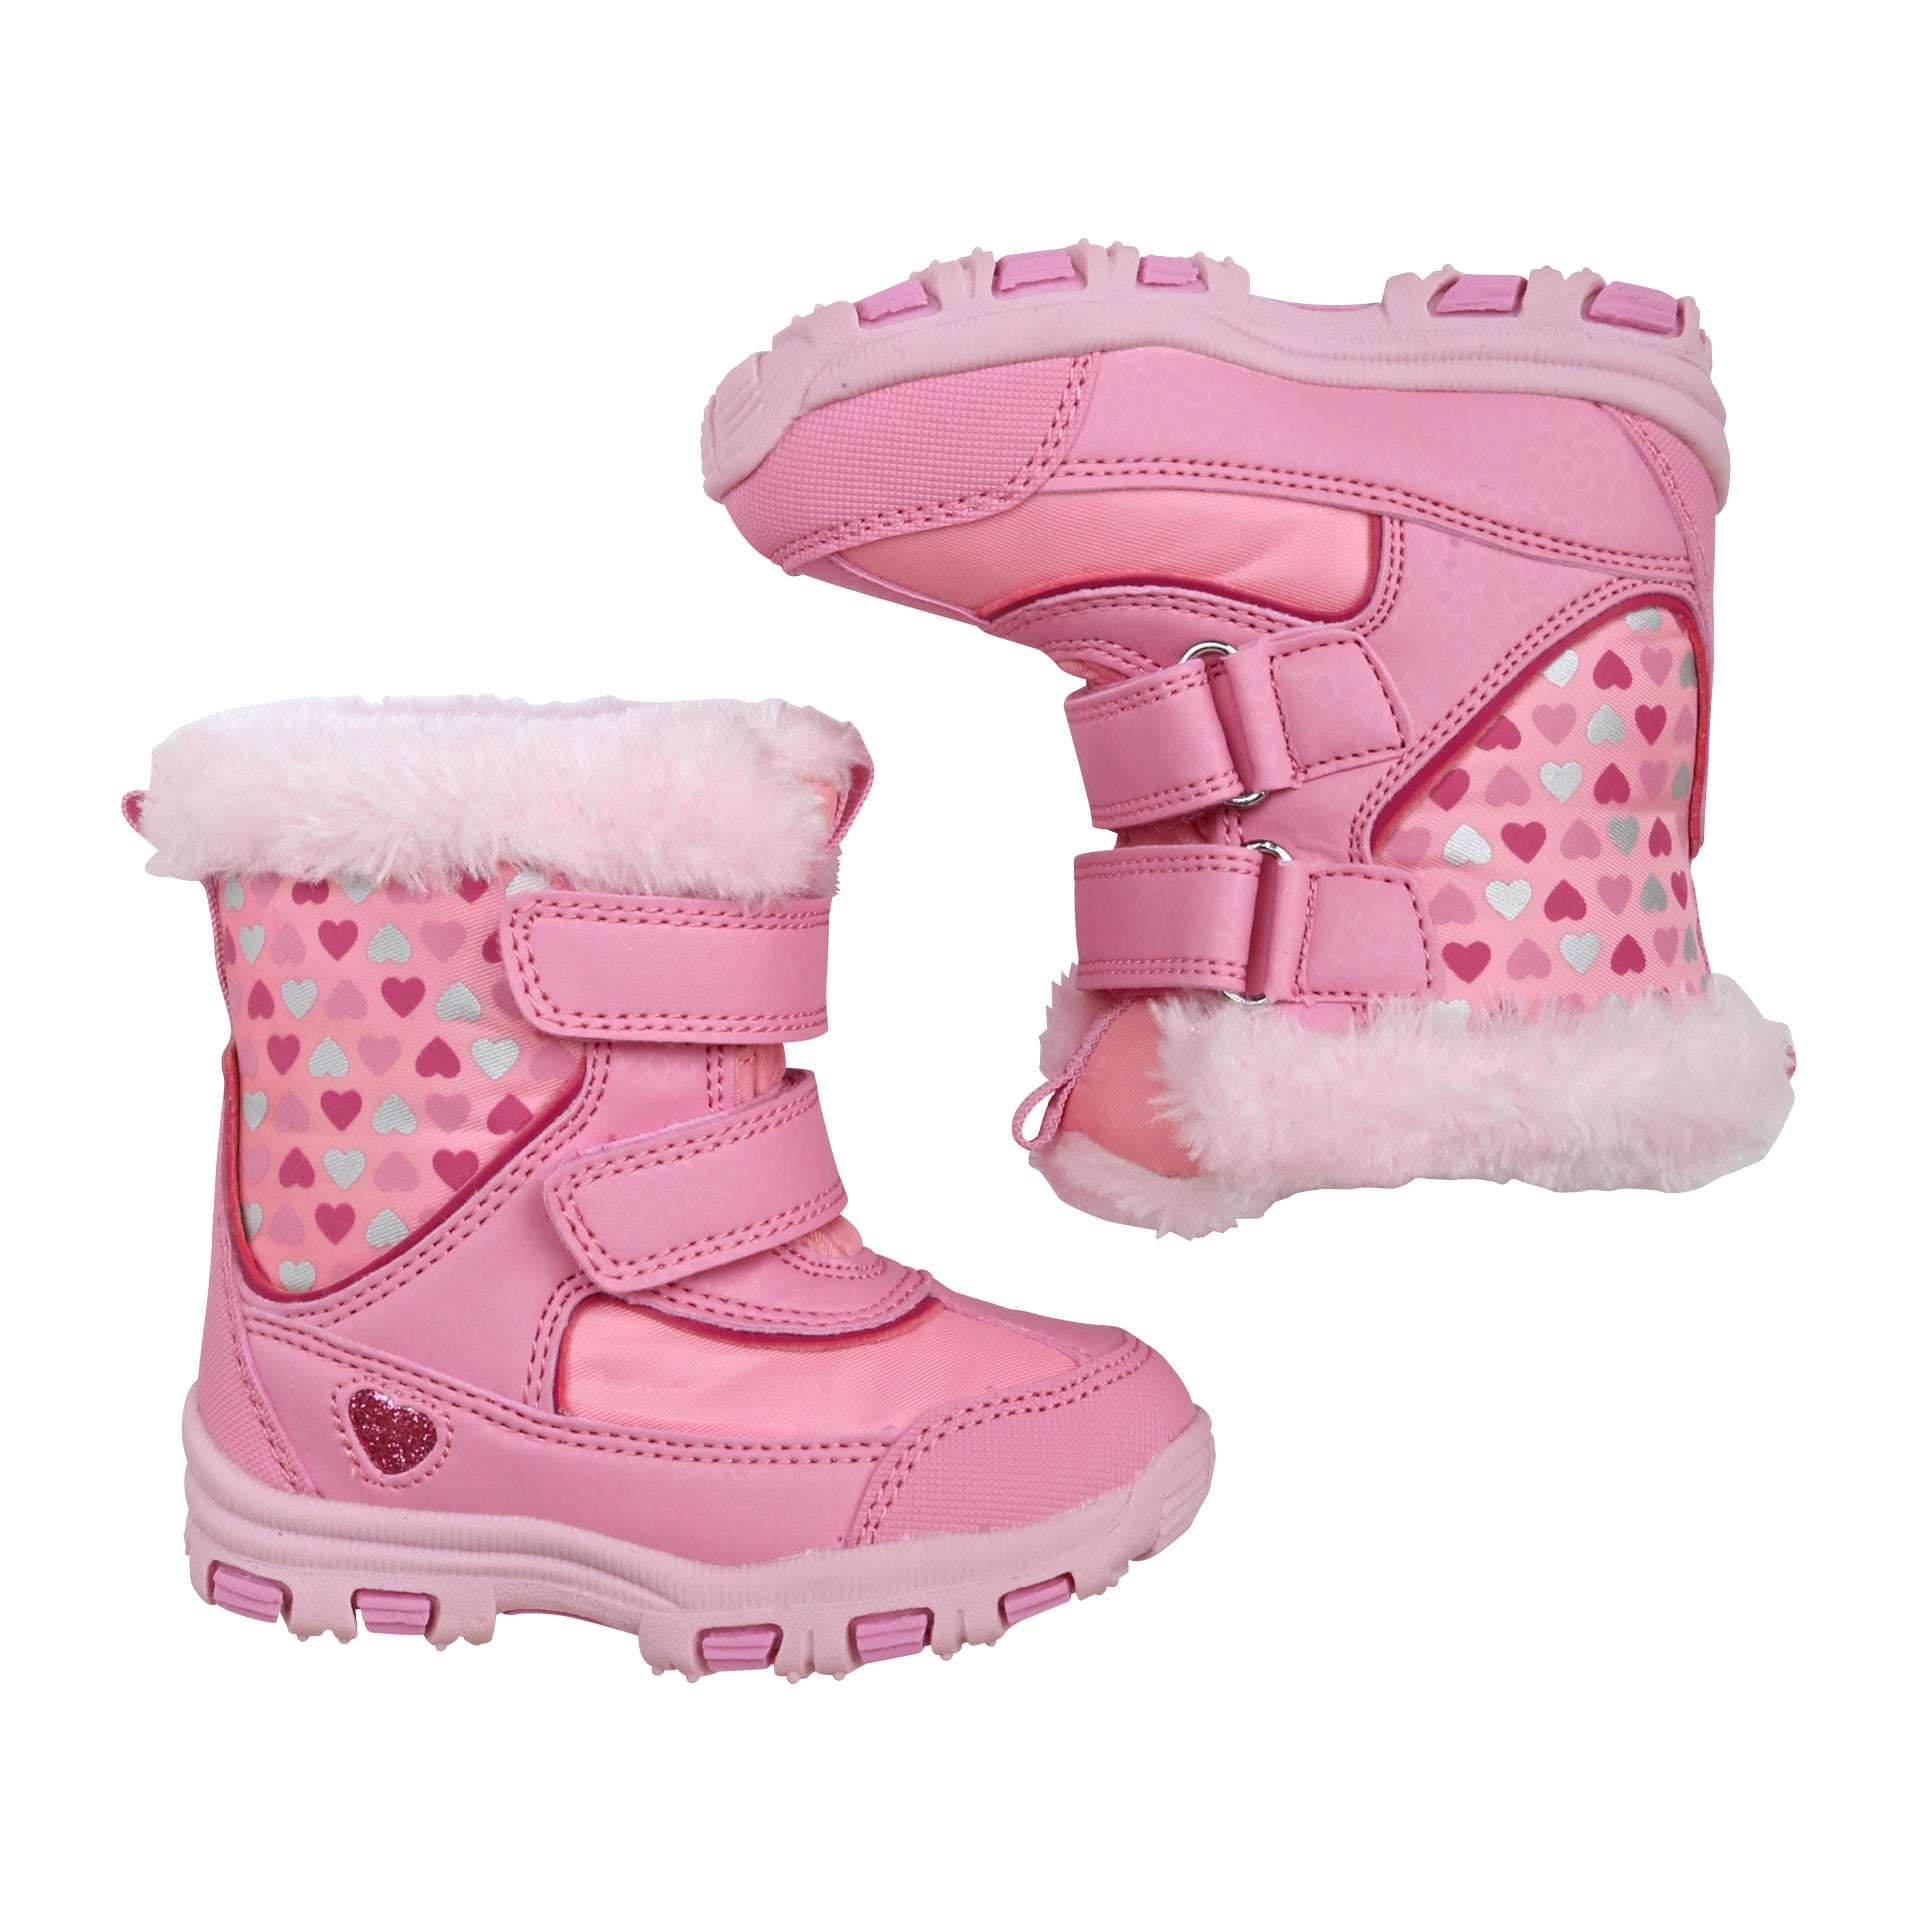 youth snow boots clearance